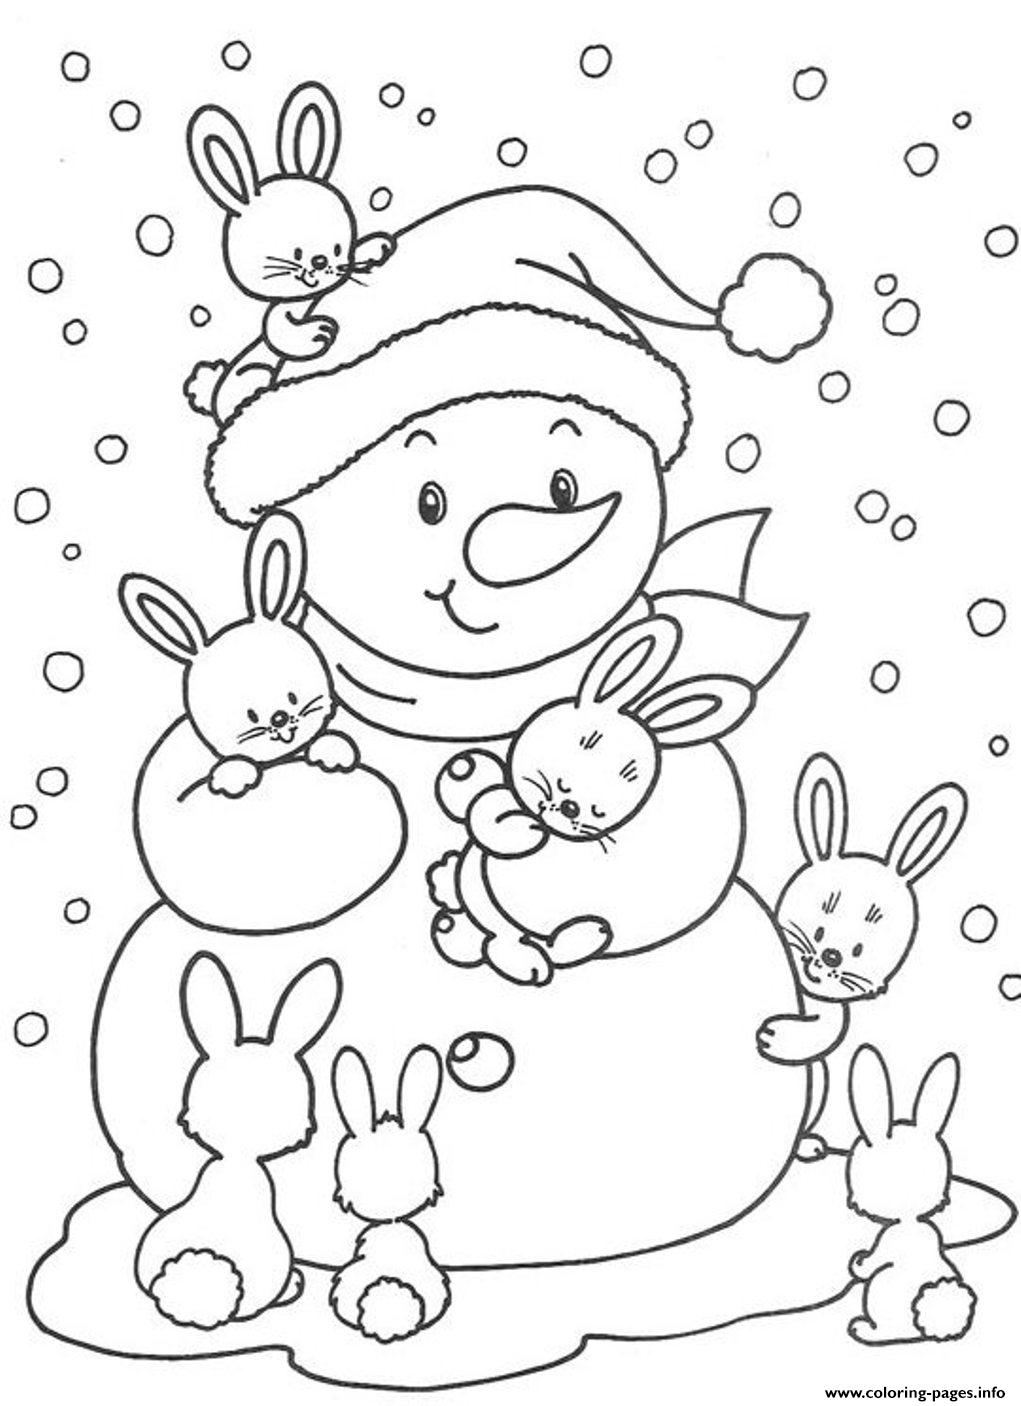 Cute Bunnies And Snowman Free Winter S57ab coloring